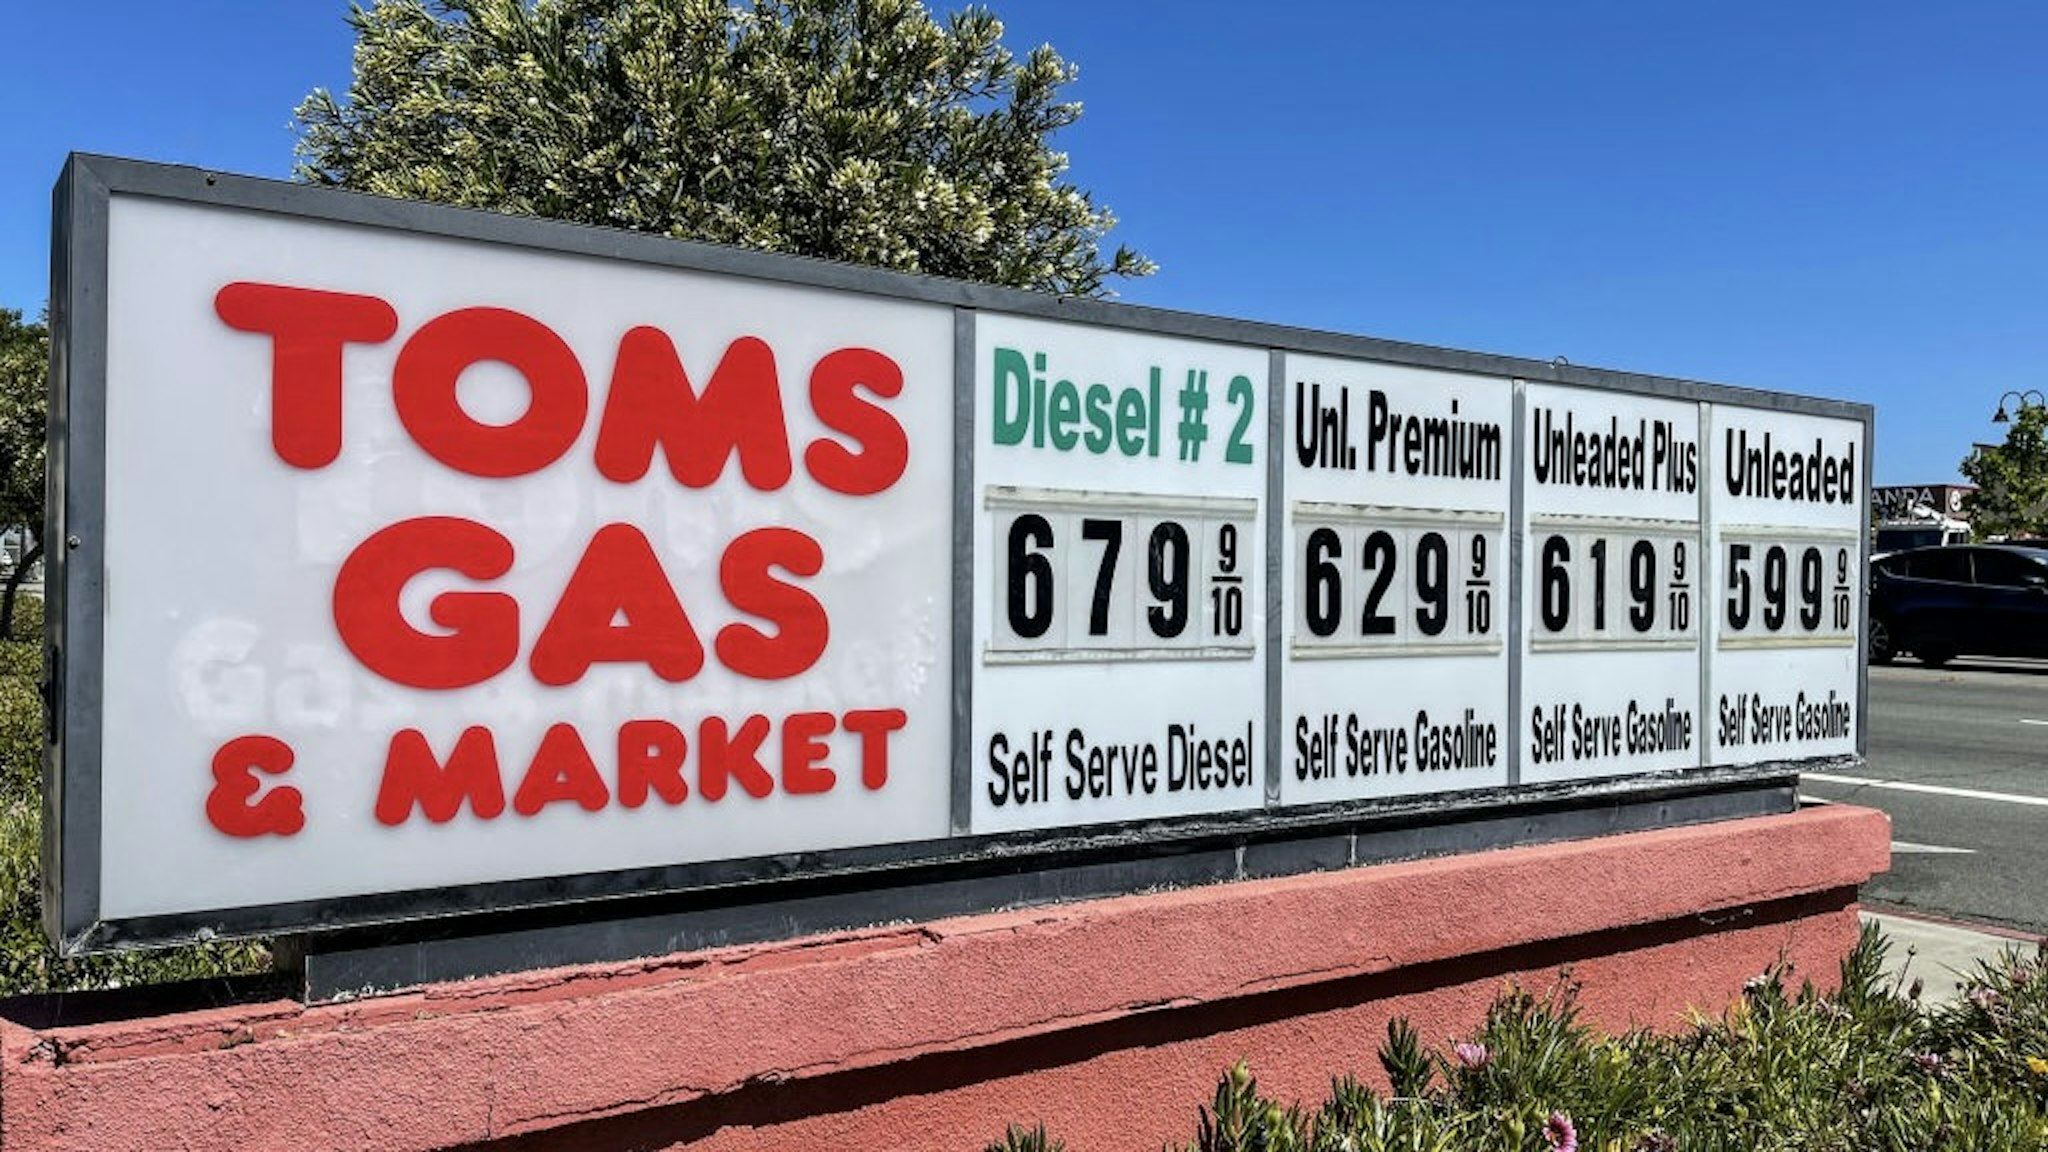 Exploring Santa Barbara County's Wine Country BUELLTON, CA - JUNE 12: Gas prices at Tom's Gas & Market independent service station climbed to $6.00 per gallon for regular with Diesel fuel selling for $6.79 per gallon following the Memorial Weekend traval holiday as viewed on June 12, 2022, in Buellton, California. Because of its close proximity to Southern California and Los Angeles population centers, Santa Barbara County's Wine Country has become a popular weekend getaway destination for millions of tourists each year. (Photo by George Rose/Getty Images) George Rose / Contributor